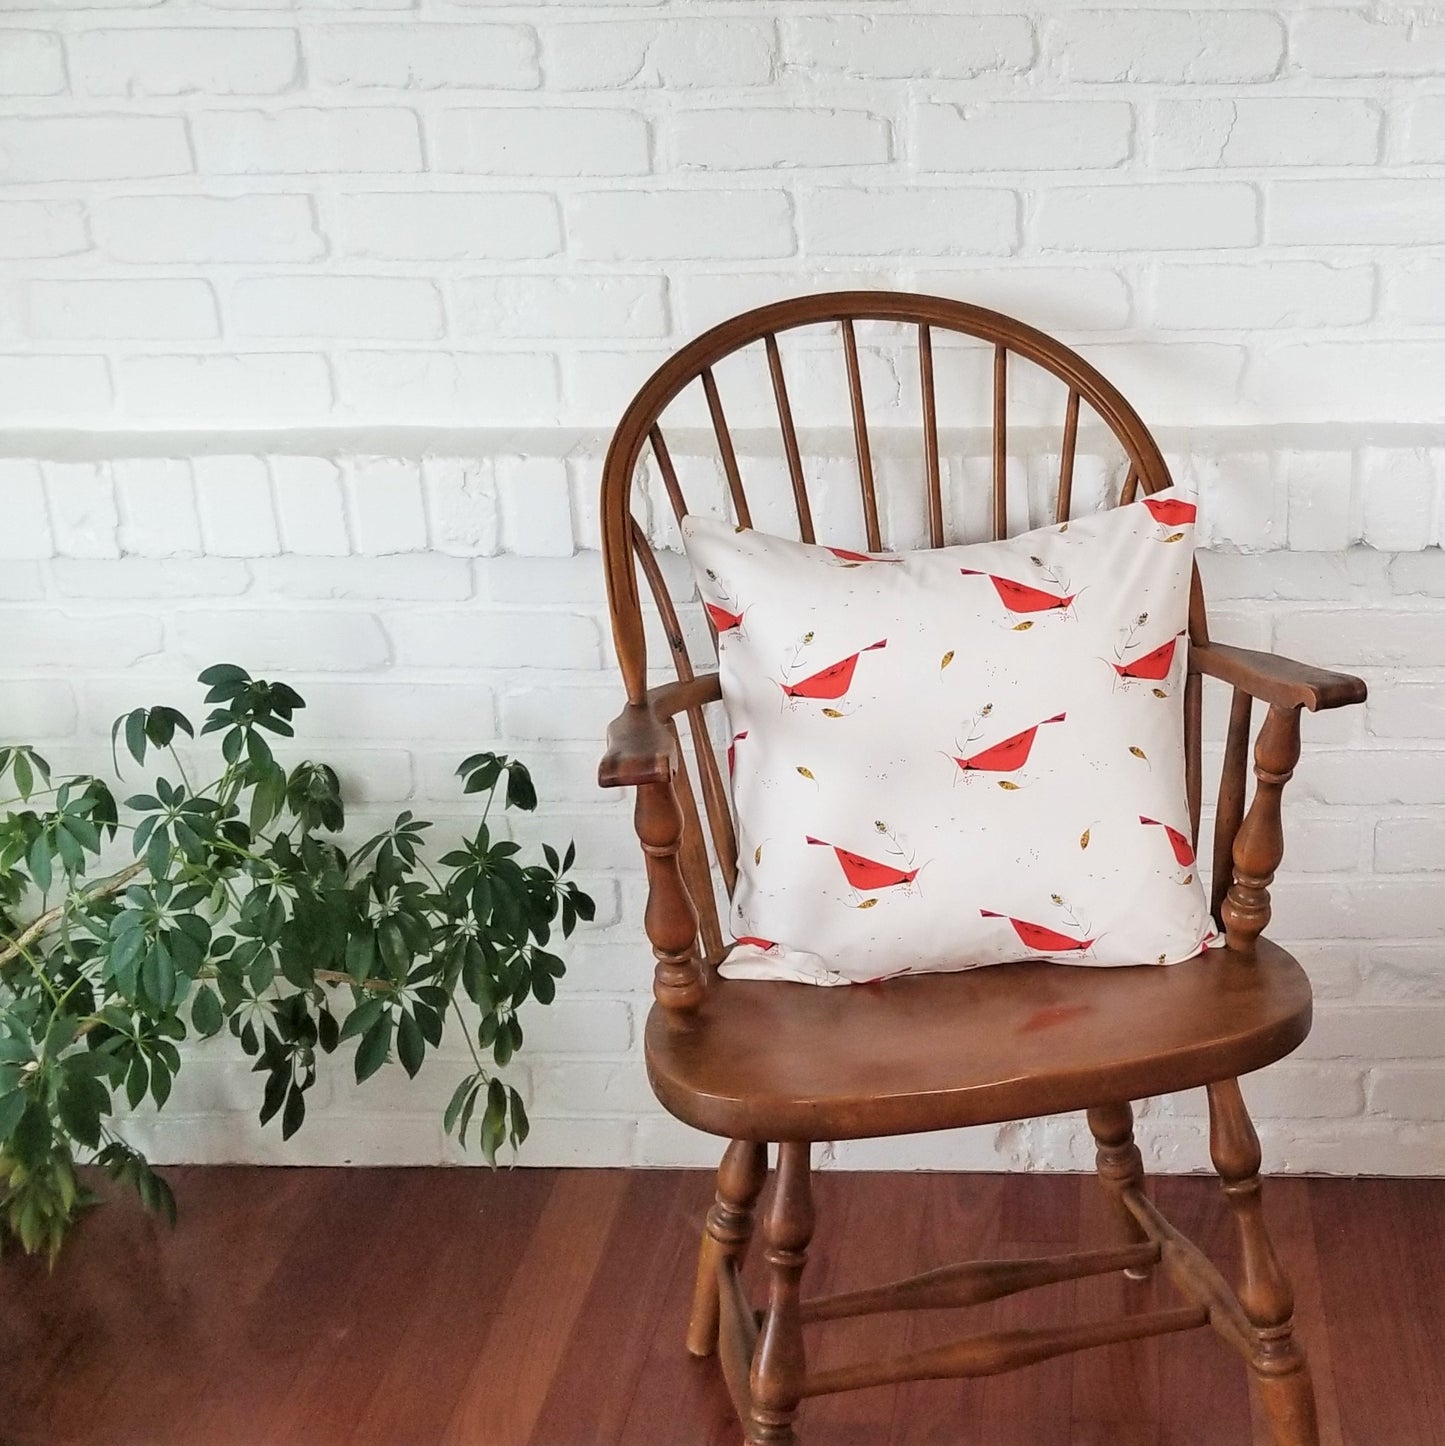 Organic Cotton Accent Pillows in Cardinal Holiday Prints